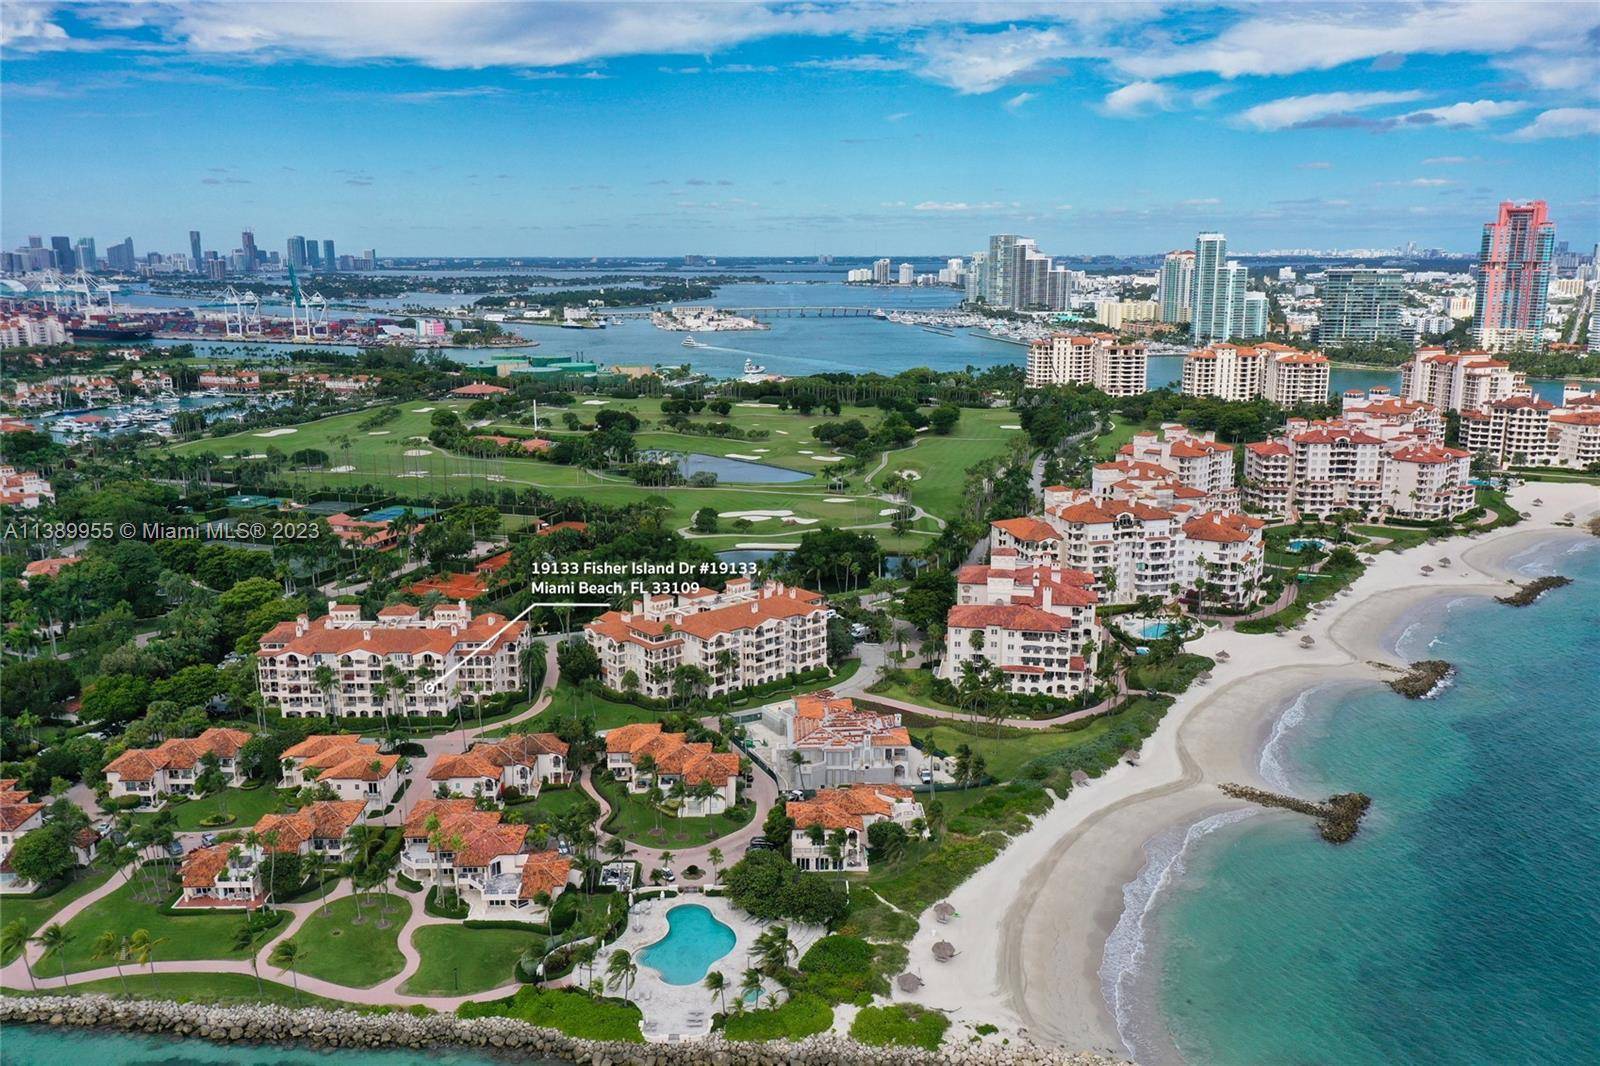 Welcome to paradise, Fisher Island, the most prestigious address in South Florida only to be reached by Ferry !